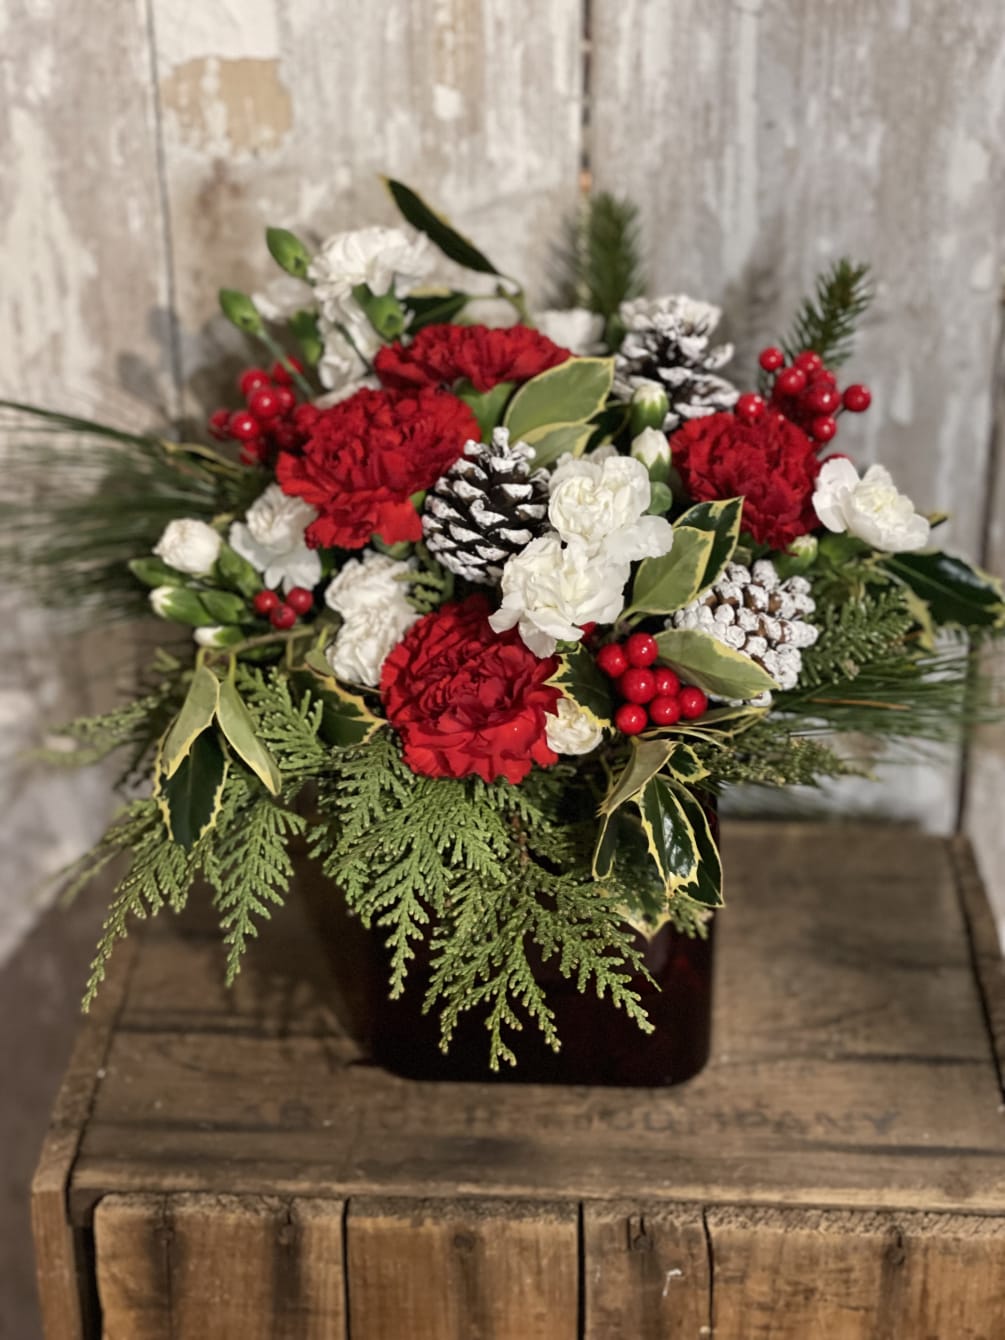 This adorable holiday arrangement is delivered in a festive red cube and